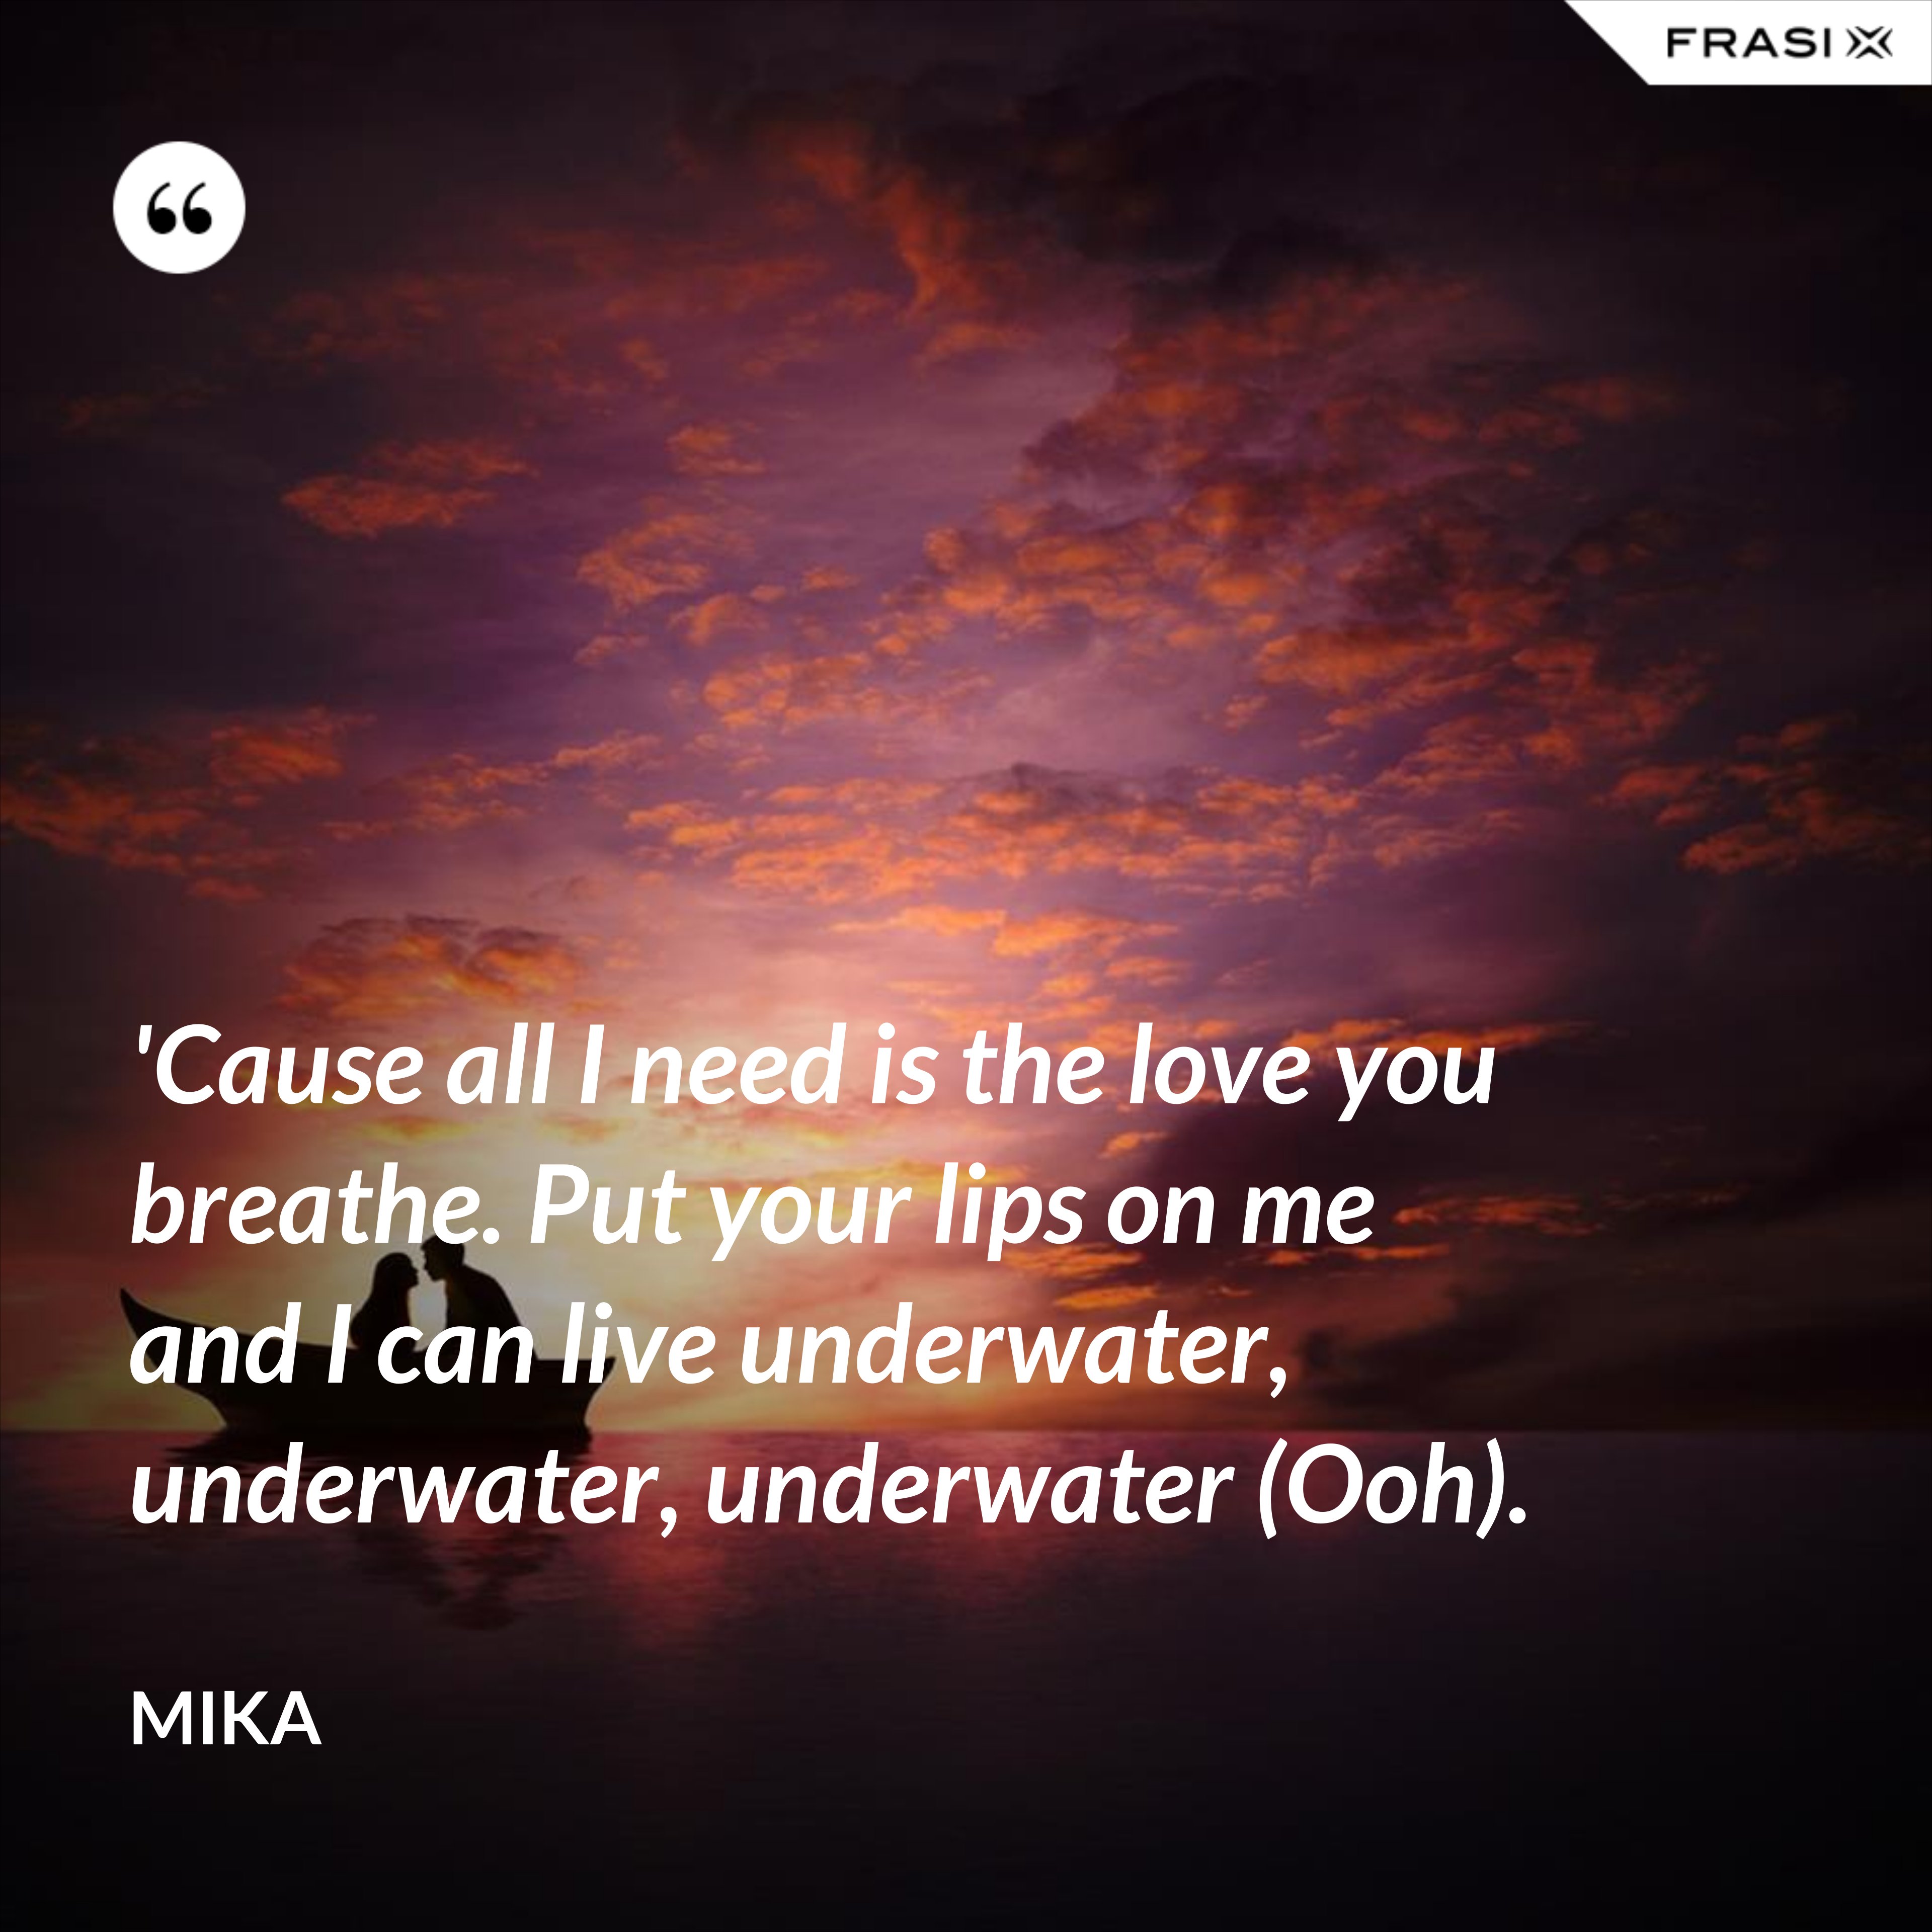 'Cause all I need is the love you breathe. Put your lips on me and I can live underwater, underwater, underwater (Ooh). - Mika